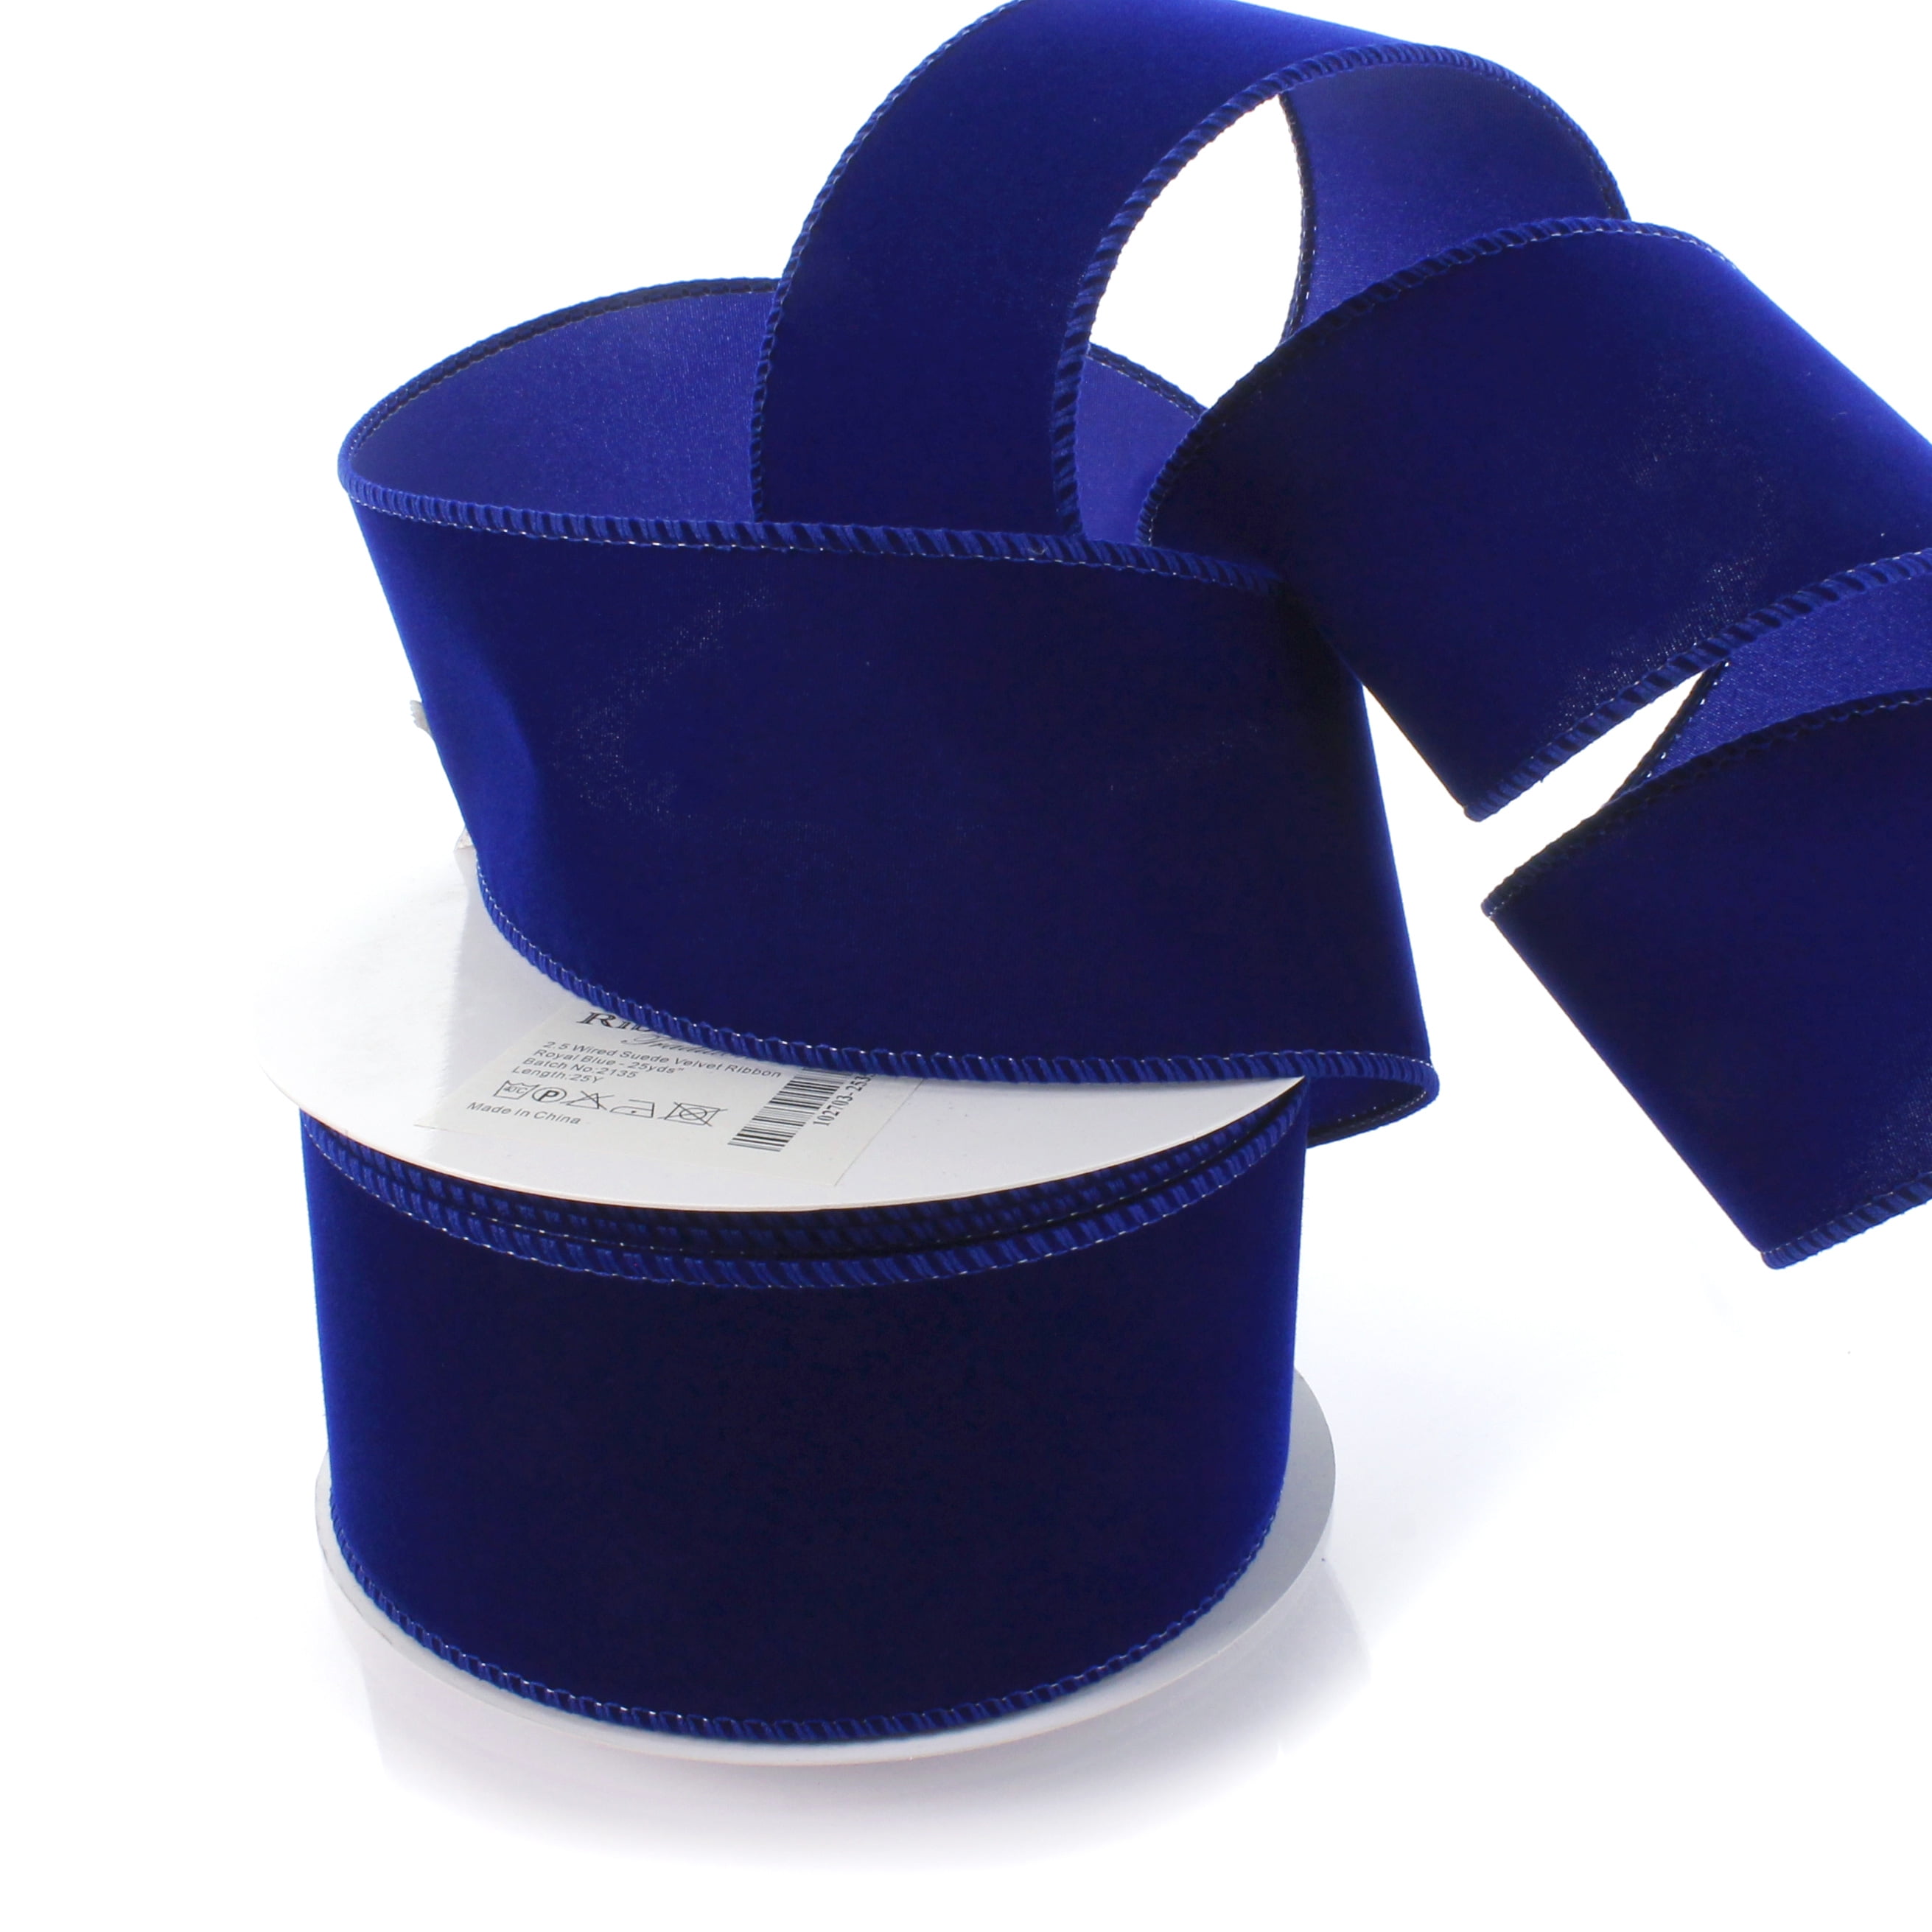 Ribbon Traditions 2.5 Wired Suede Velvet Ribbon Royal Blue - 10 Yards